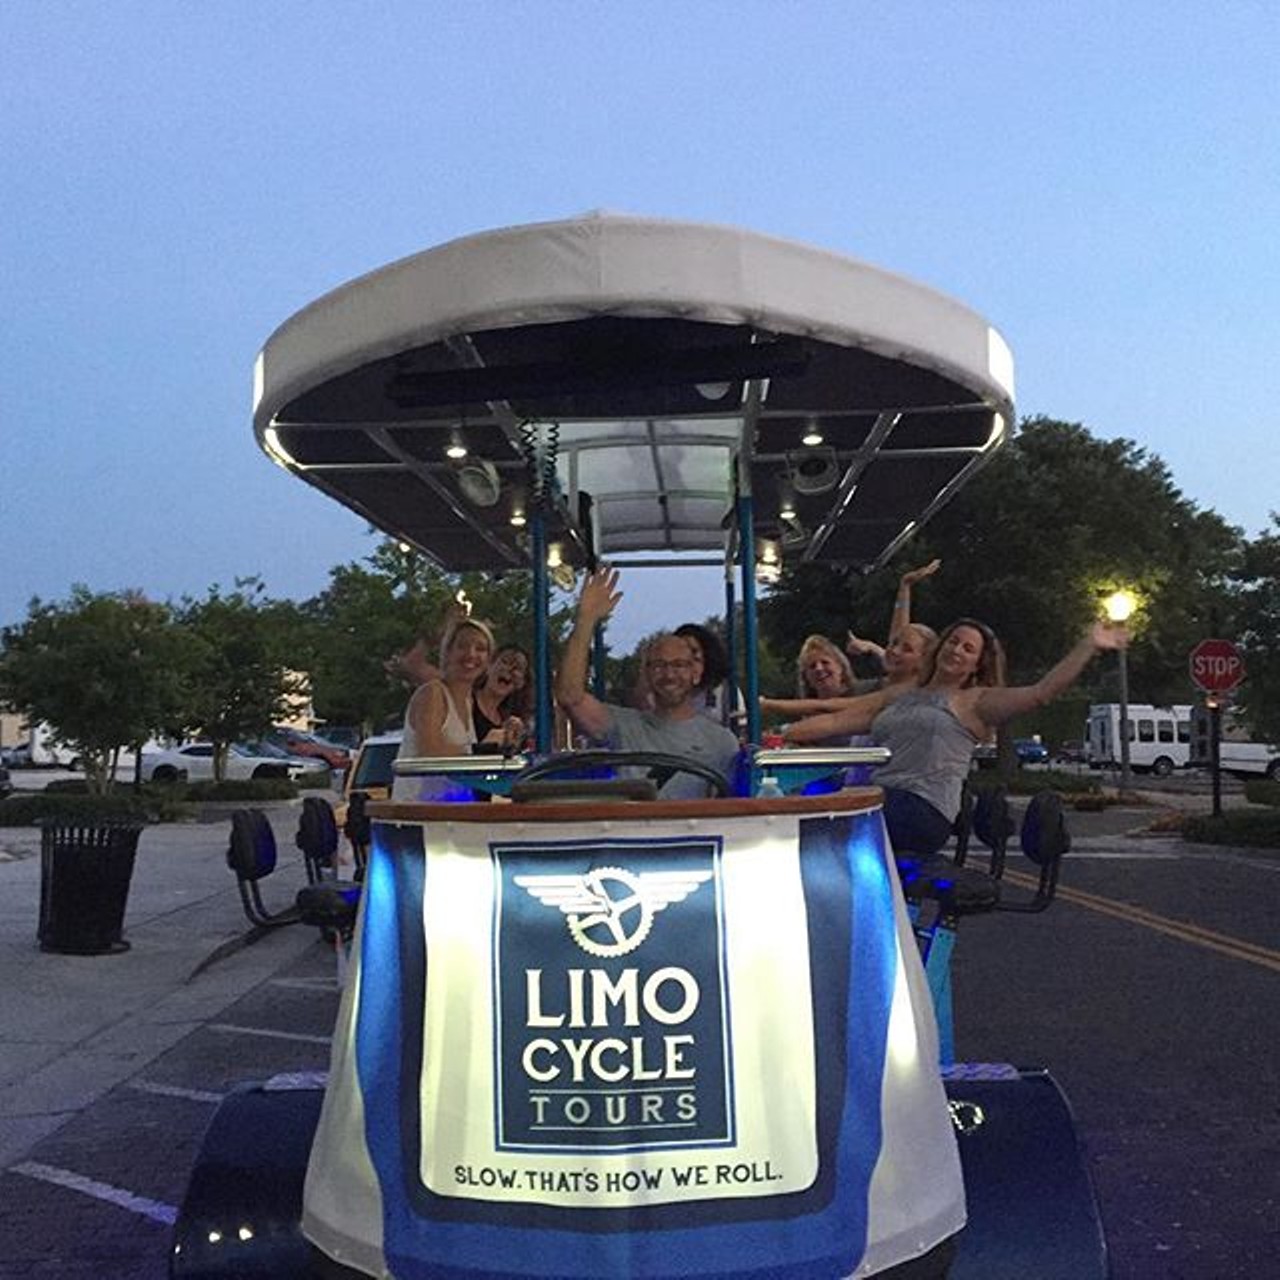  Limo Cycle Tours
303 West Third Street, Suite 4, Sanford, 855-756-9386  $50-$450
If you&#146;ve ever wanted to be on a 10-person tandem bike, this might be the perfect tour for you. Choose from a variety of different tours, from an adventure tour chasing down pirates to a Sunday Brunch tour that includes free mimosas. The limo cycle fits 15 people in total, with 10 people pedaling and 5 catching a free ride, so the more people you bring, the cheaper the tour ends up being. Call or visit their website to book a tour. 
Photo via orlandodatenightguide/Instagram